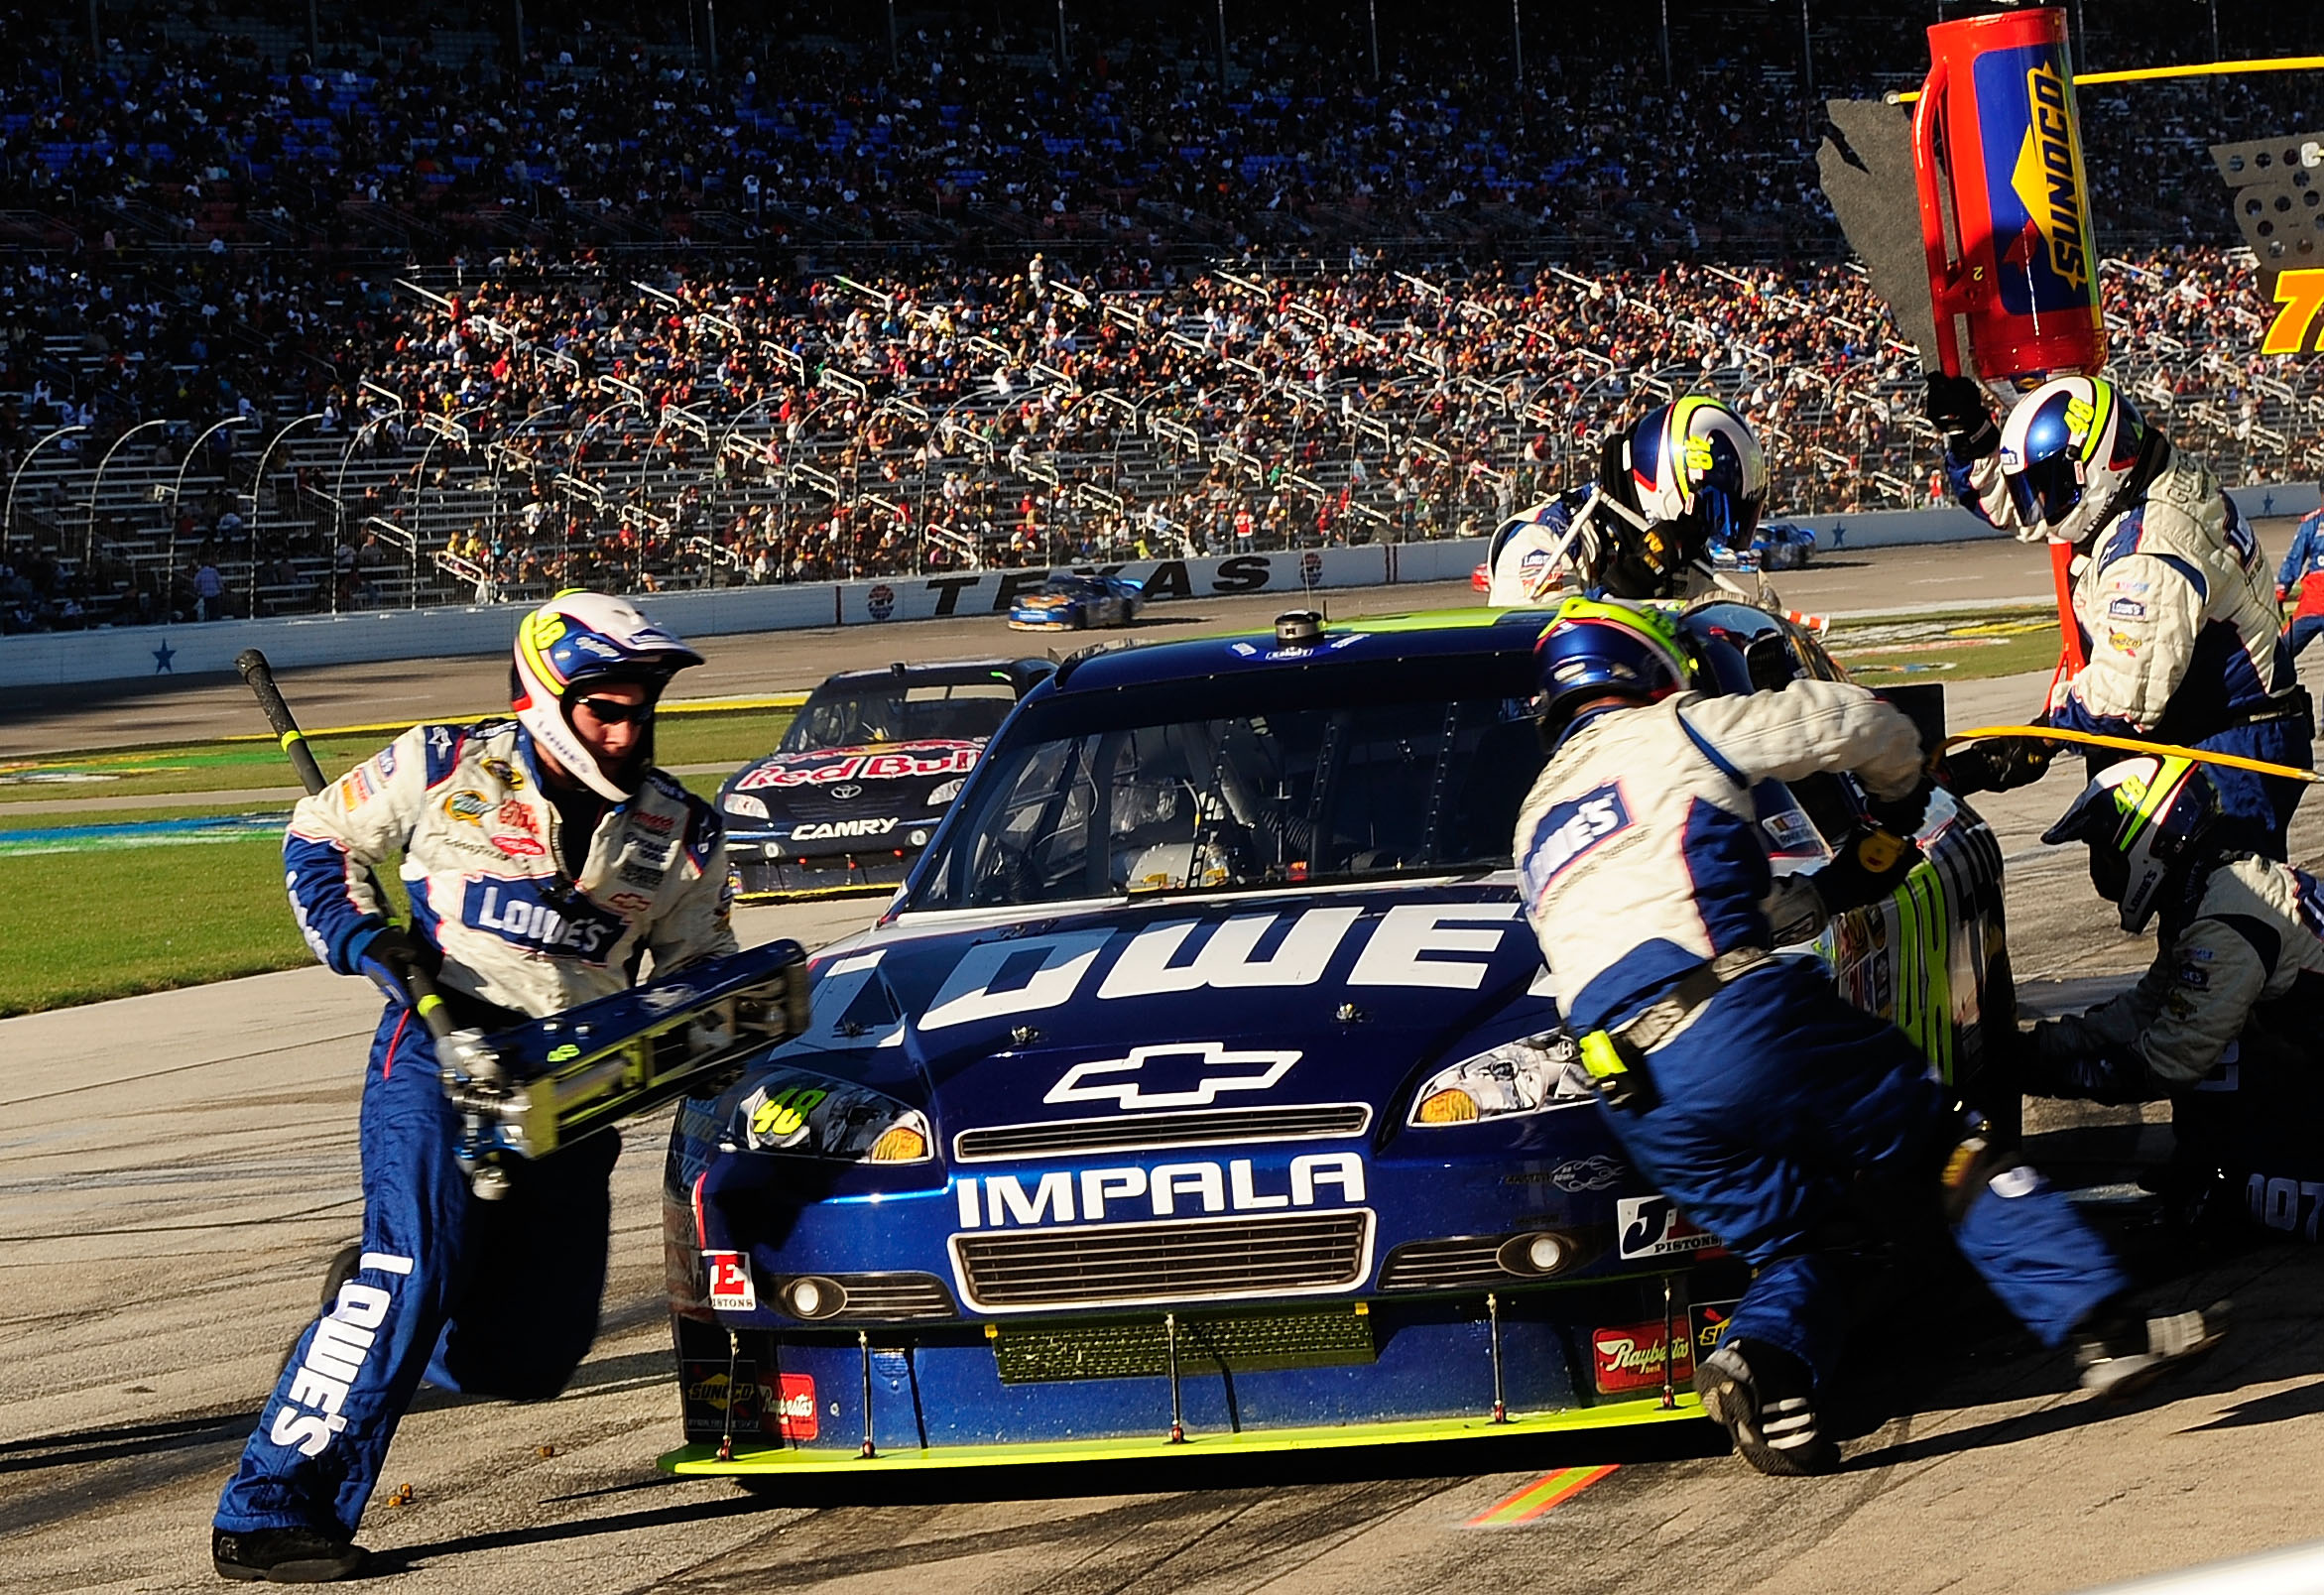 FORT WORTH, TX - NOVEMBER 07:  Jimmie Johnson, driver of the #48 Lowe's Chevrolet, makes a pit stop during the NASCAR Sprint Cup Series AAA Texas 500 at Texas Motor Speedway on November 7, 2010 in Fort Worth, Texas.  (Photo by Rusty Jarrett/Getty Images f